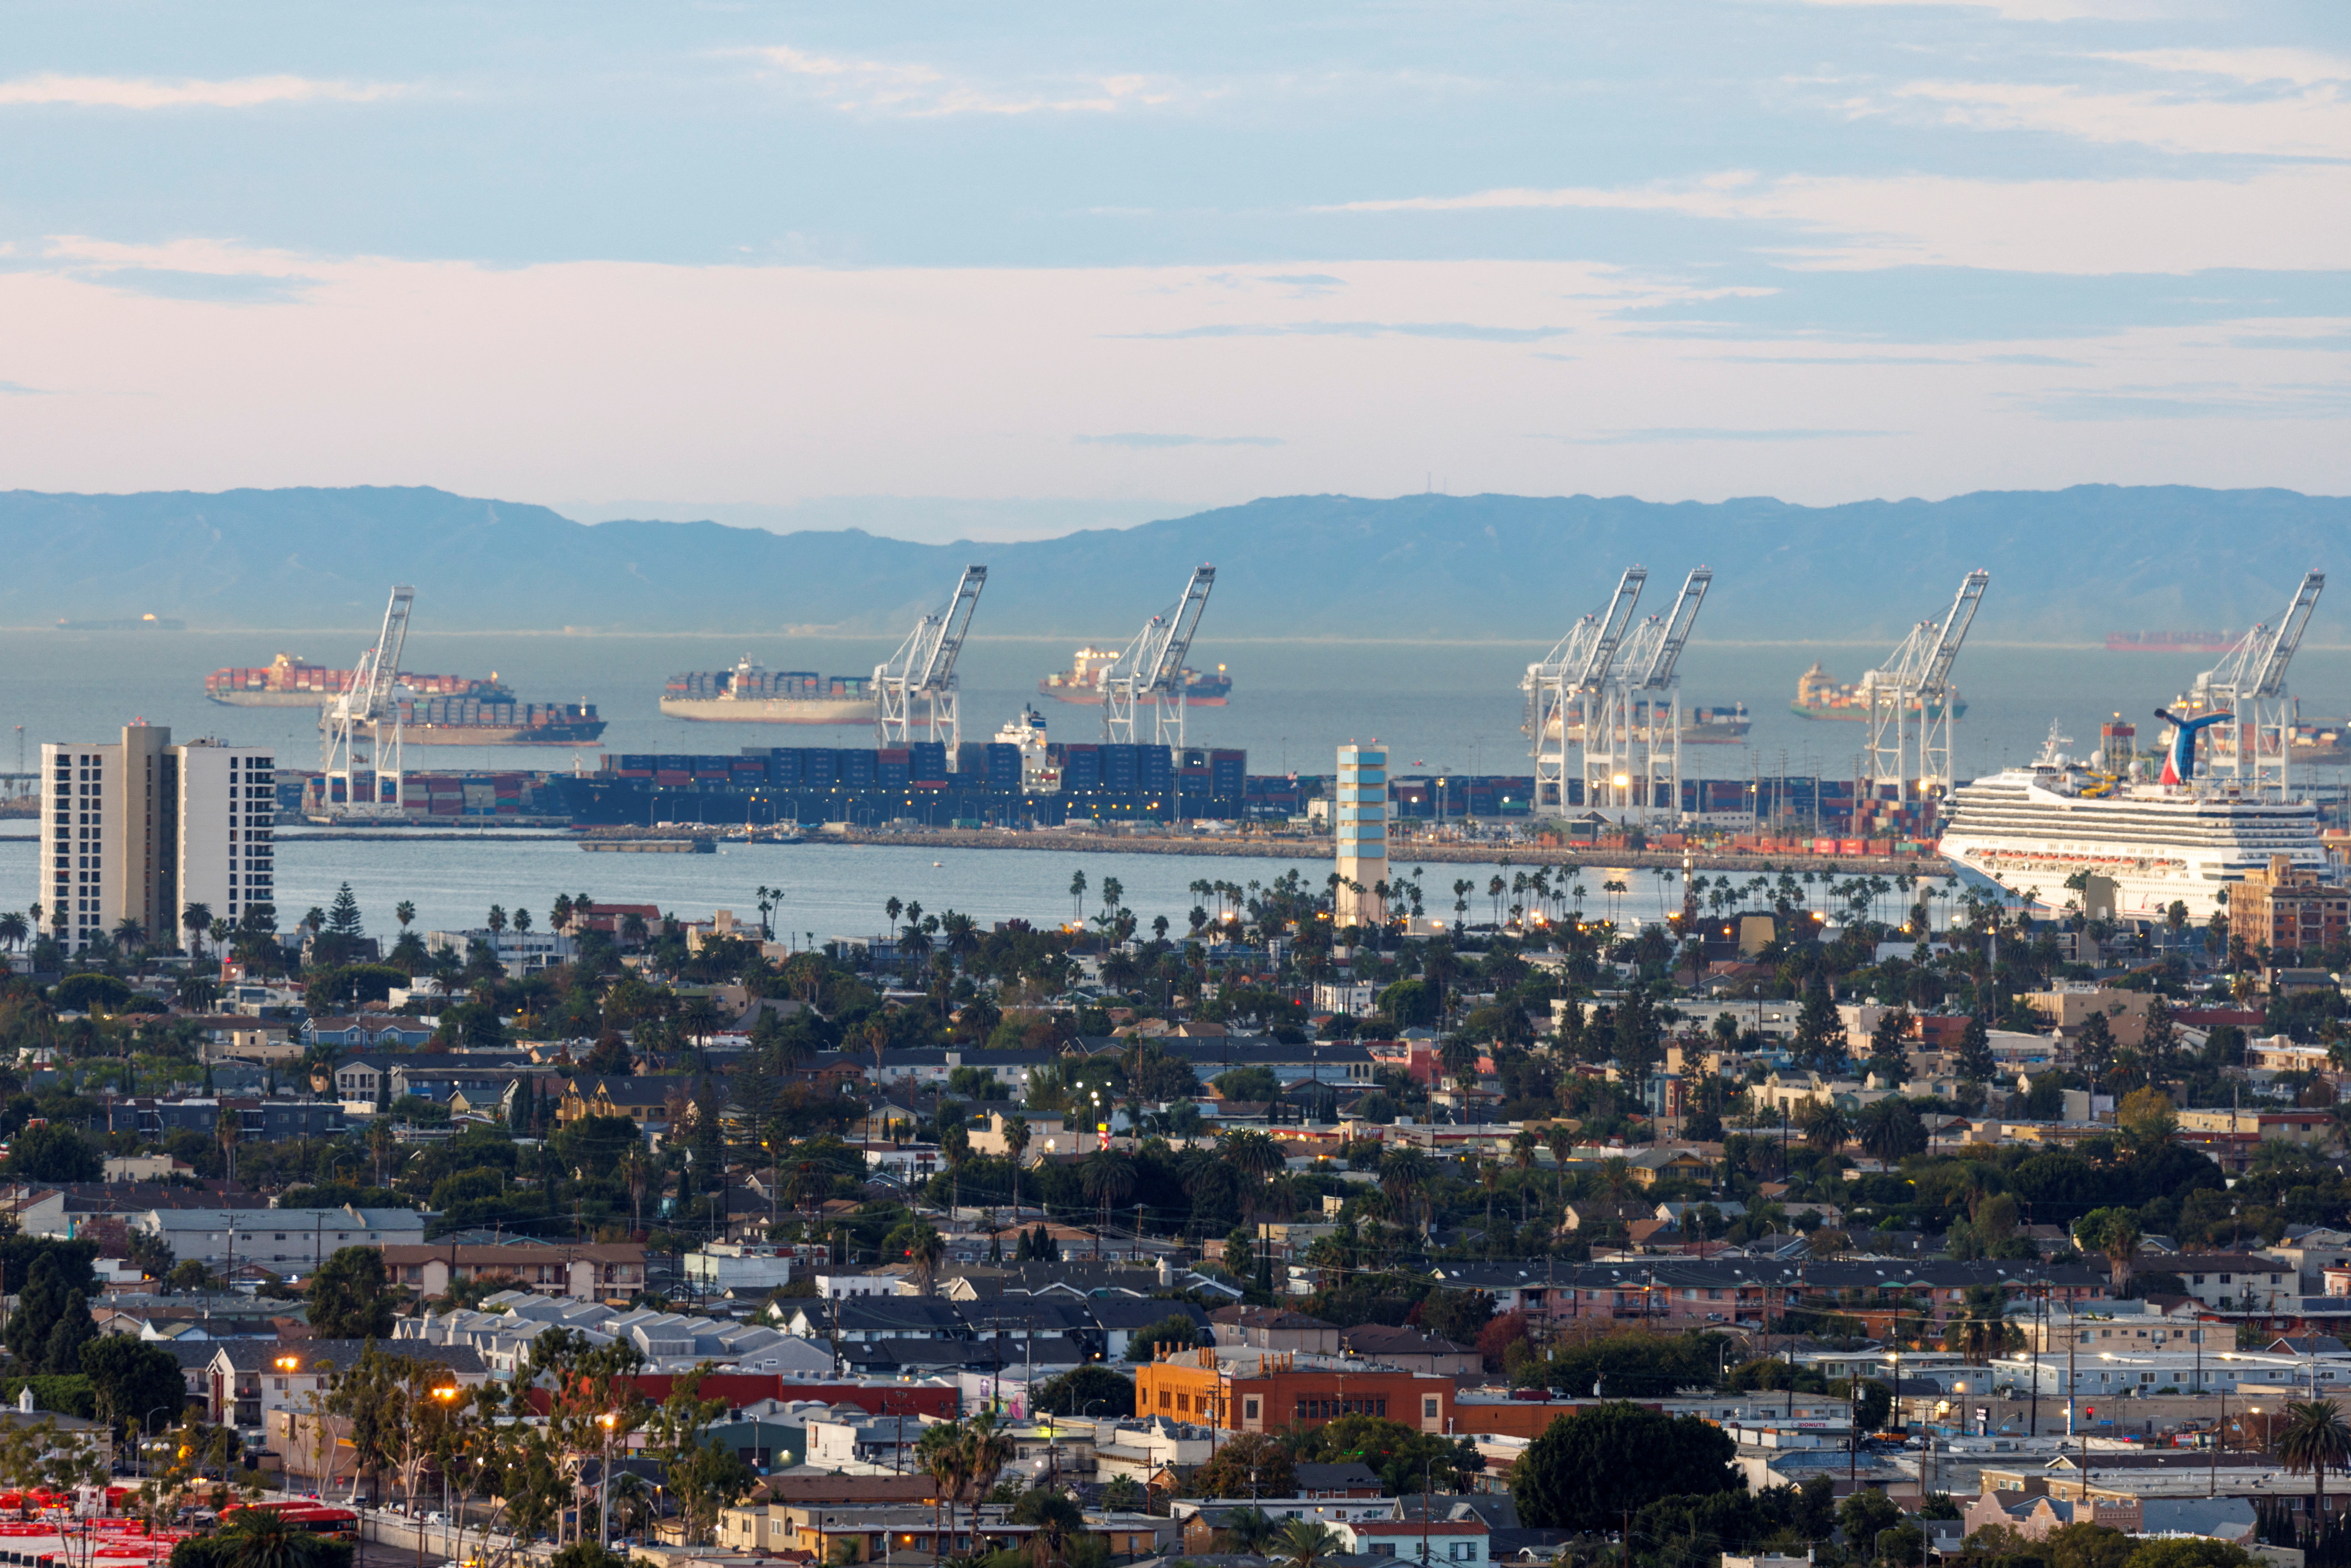 FILE PHOTO - Ships are shown offshore at the port of Long Beach, California